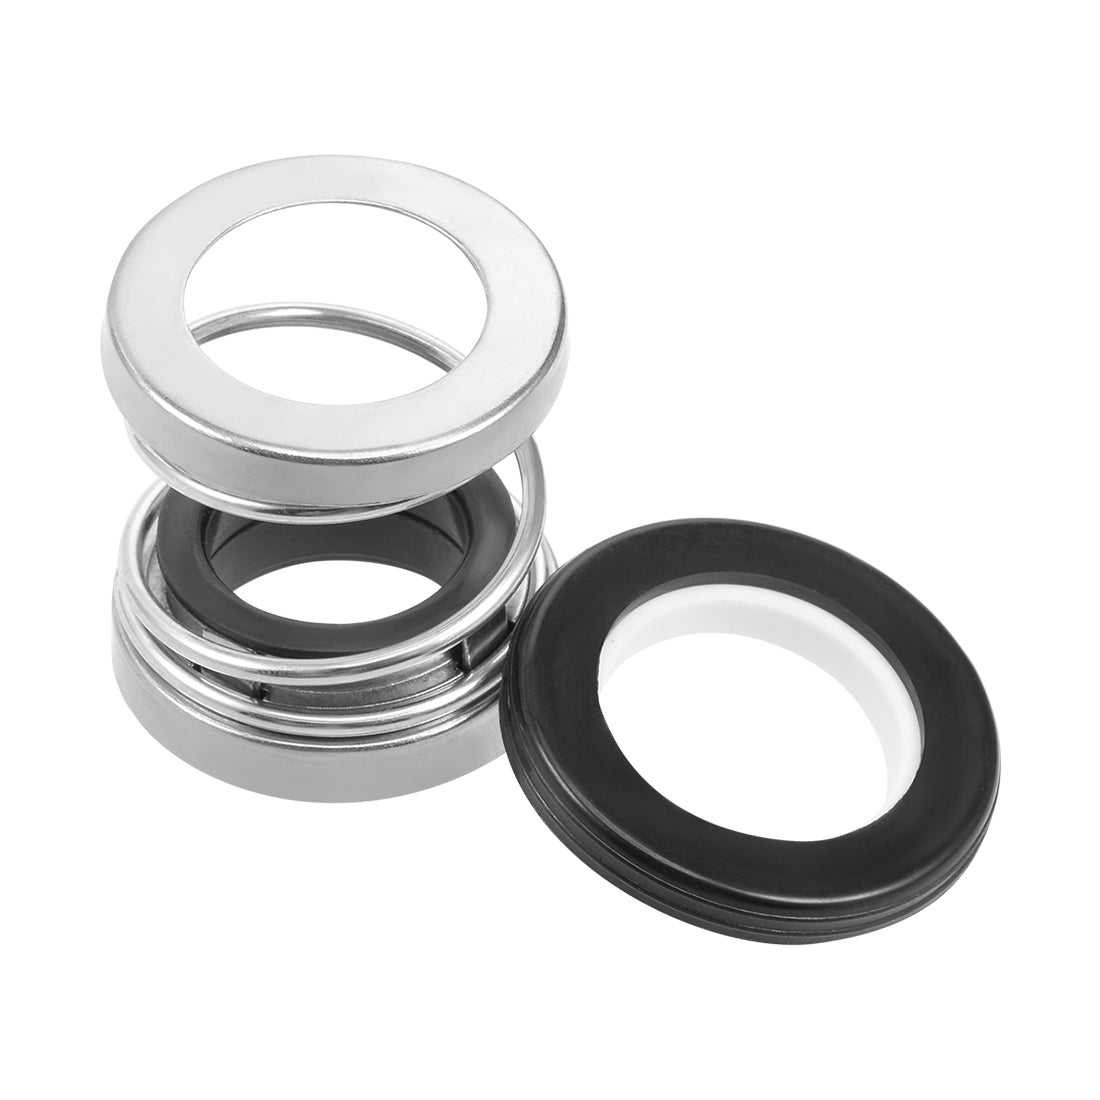 uxcell Uxcell Mechanical Shaft Seal Replacement for Pool Spa Pump 3pcs 108-19